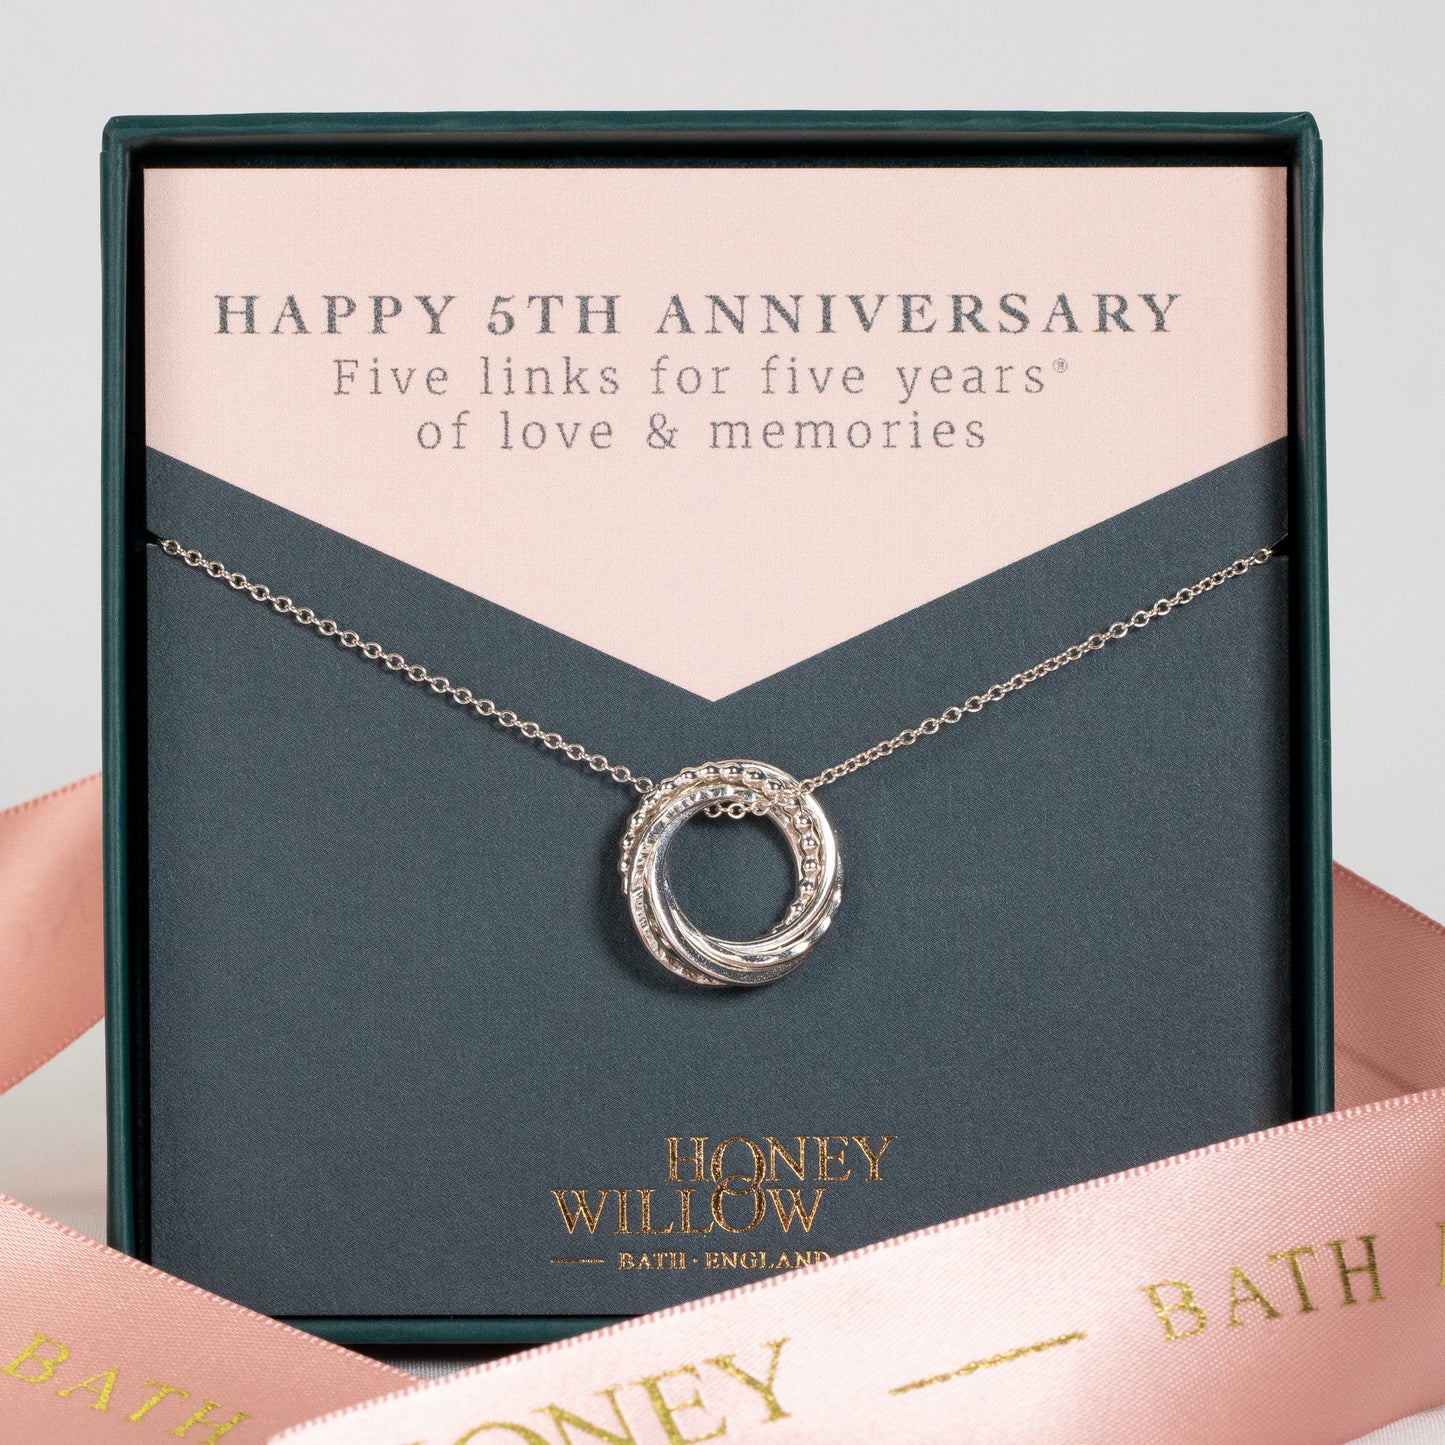 5th Anniversary Necklace - The Original 5 Rings for 5 Years Necklace - Petite Silver